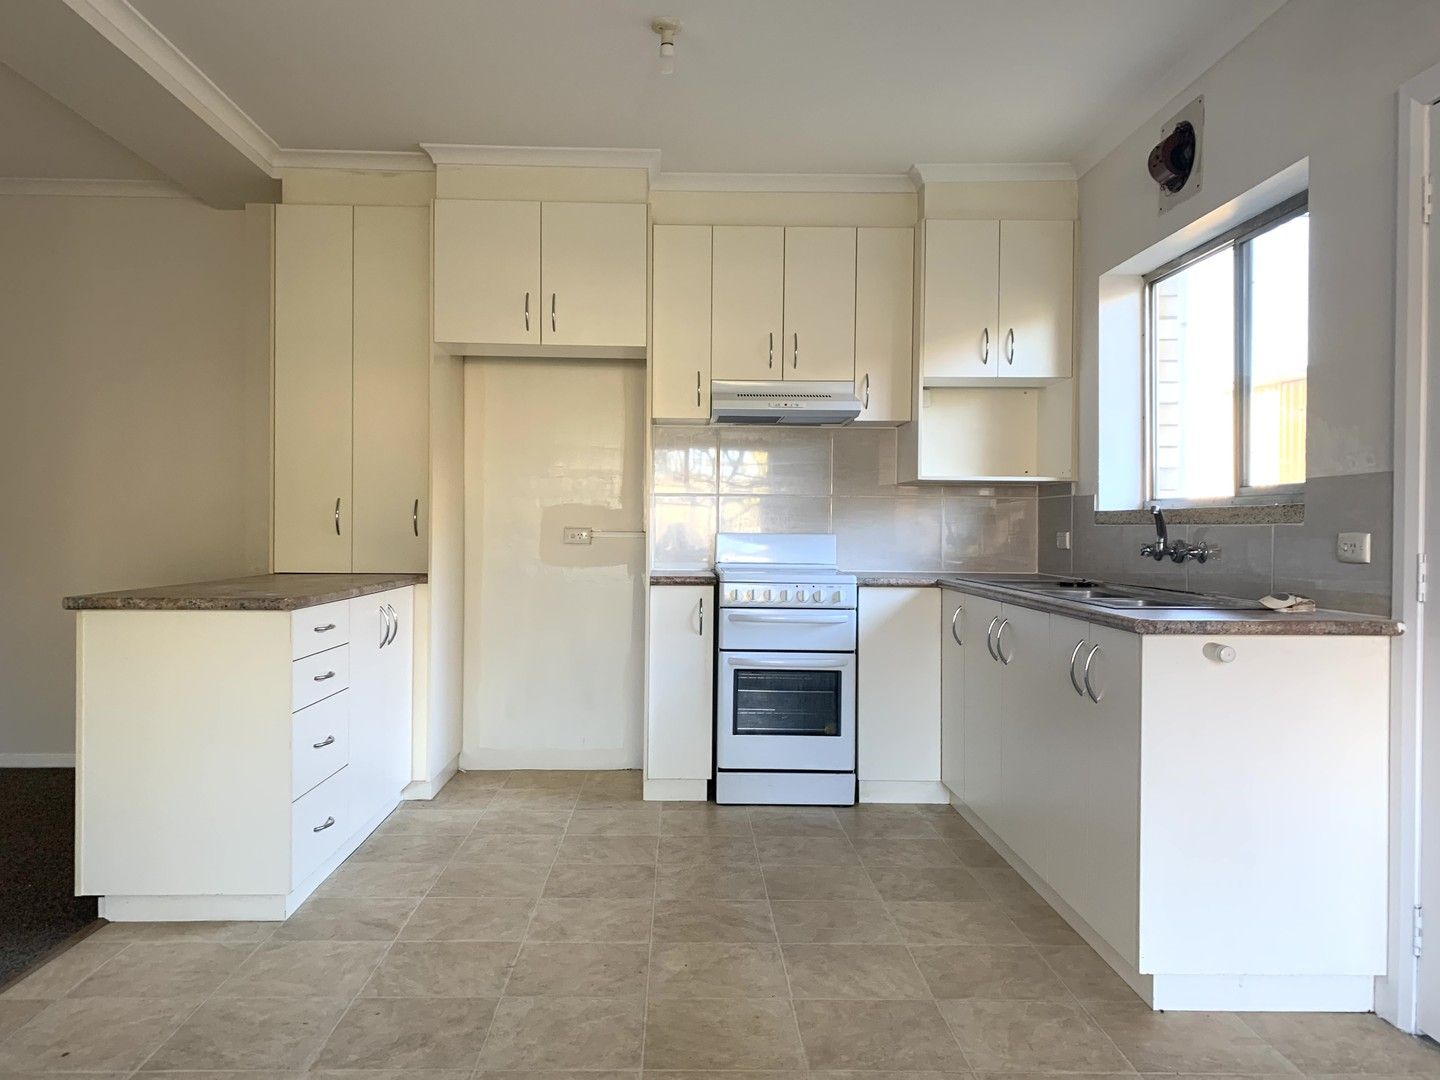 2 bedrooms Apartment / Unit / Flat in 1/4 Hensley Court WODONGA VIC, 3690